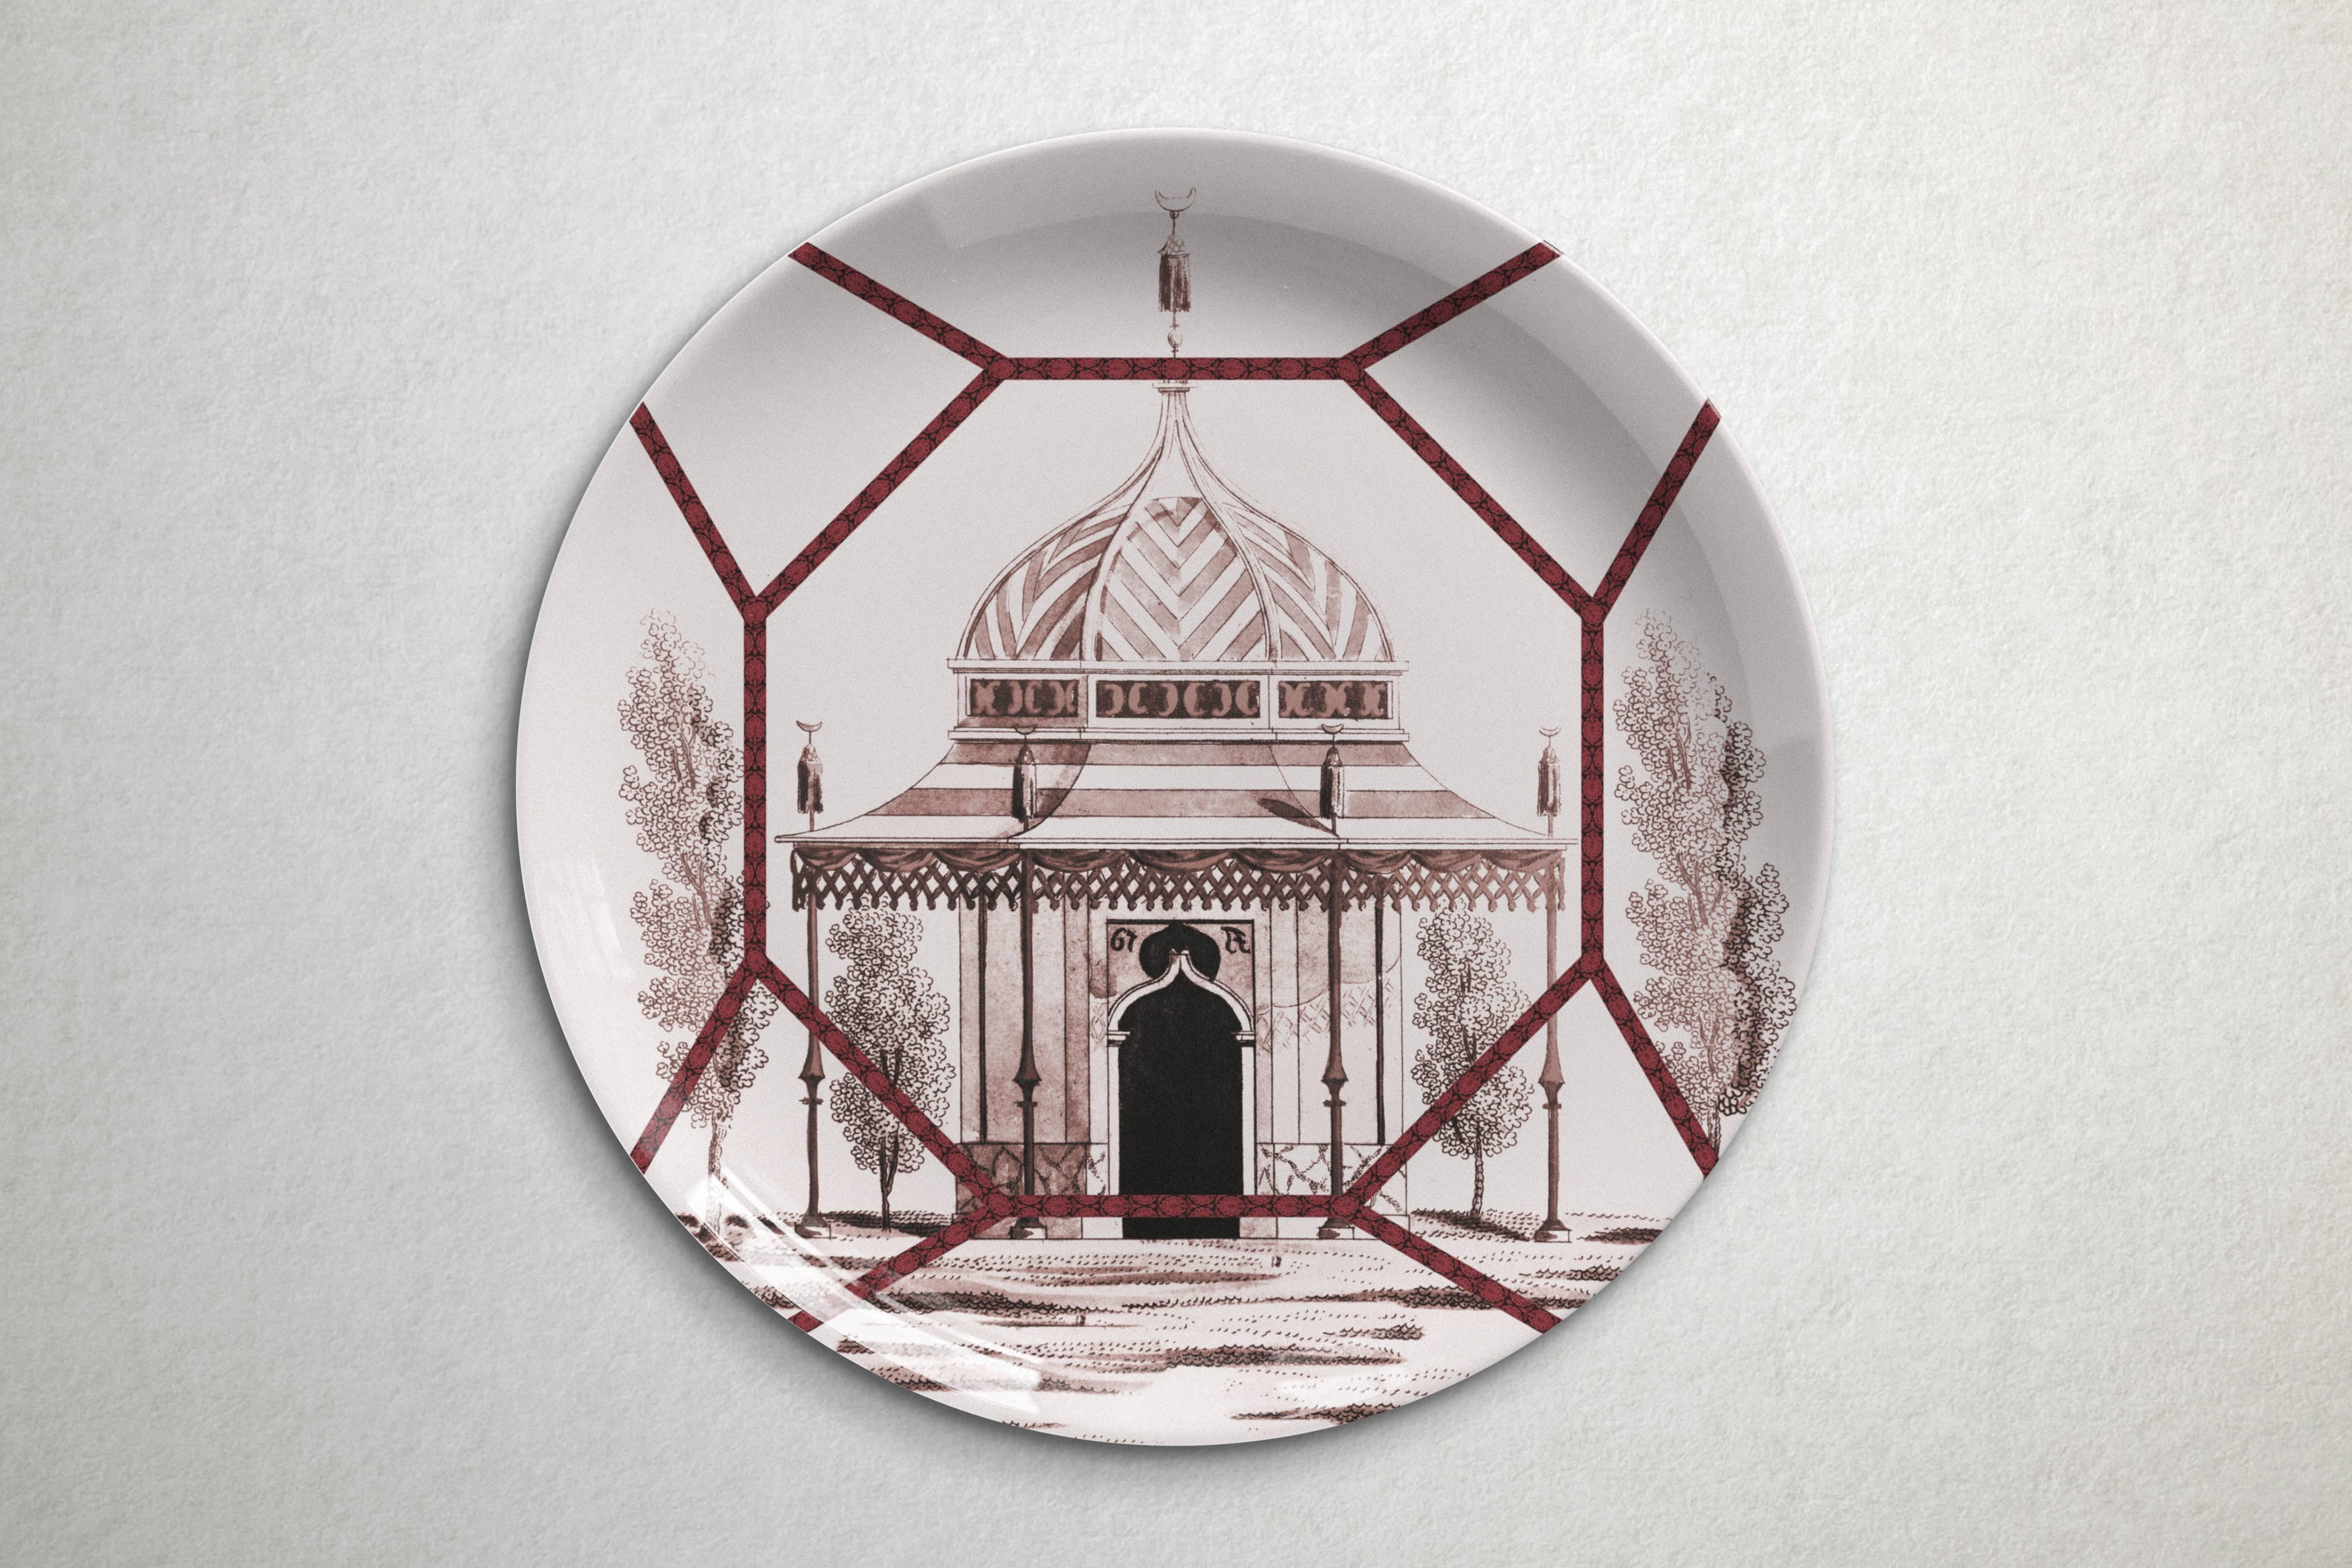 Beautiful Topkapi dinner plates by Vito Nesta for Les Ottomans will make an elegant statement with sophisticated Art de la table for every occasion

Handmade in Italy

Upon request available in a set of 12, 18 or 24 plates.